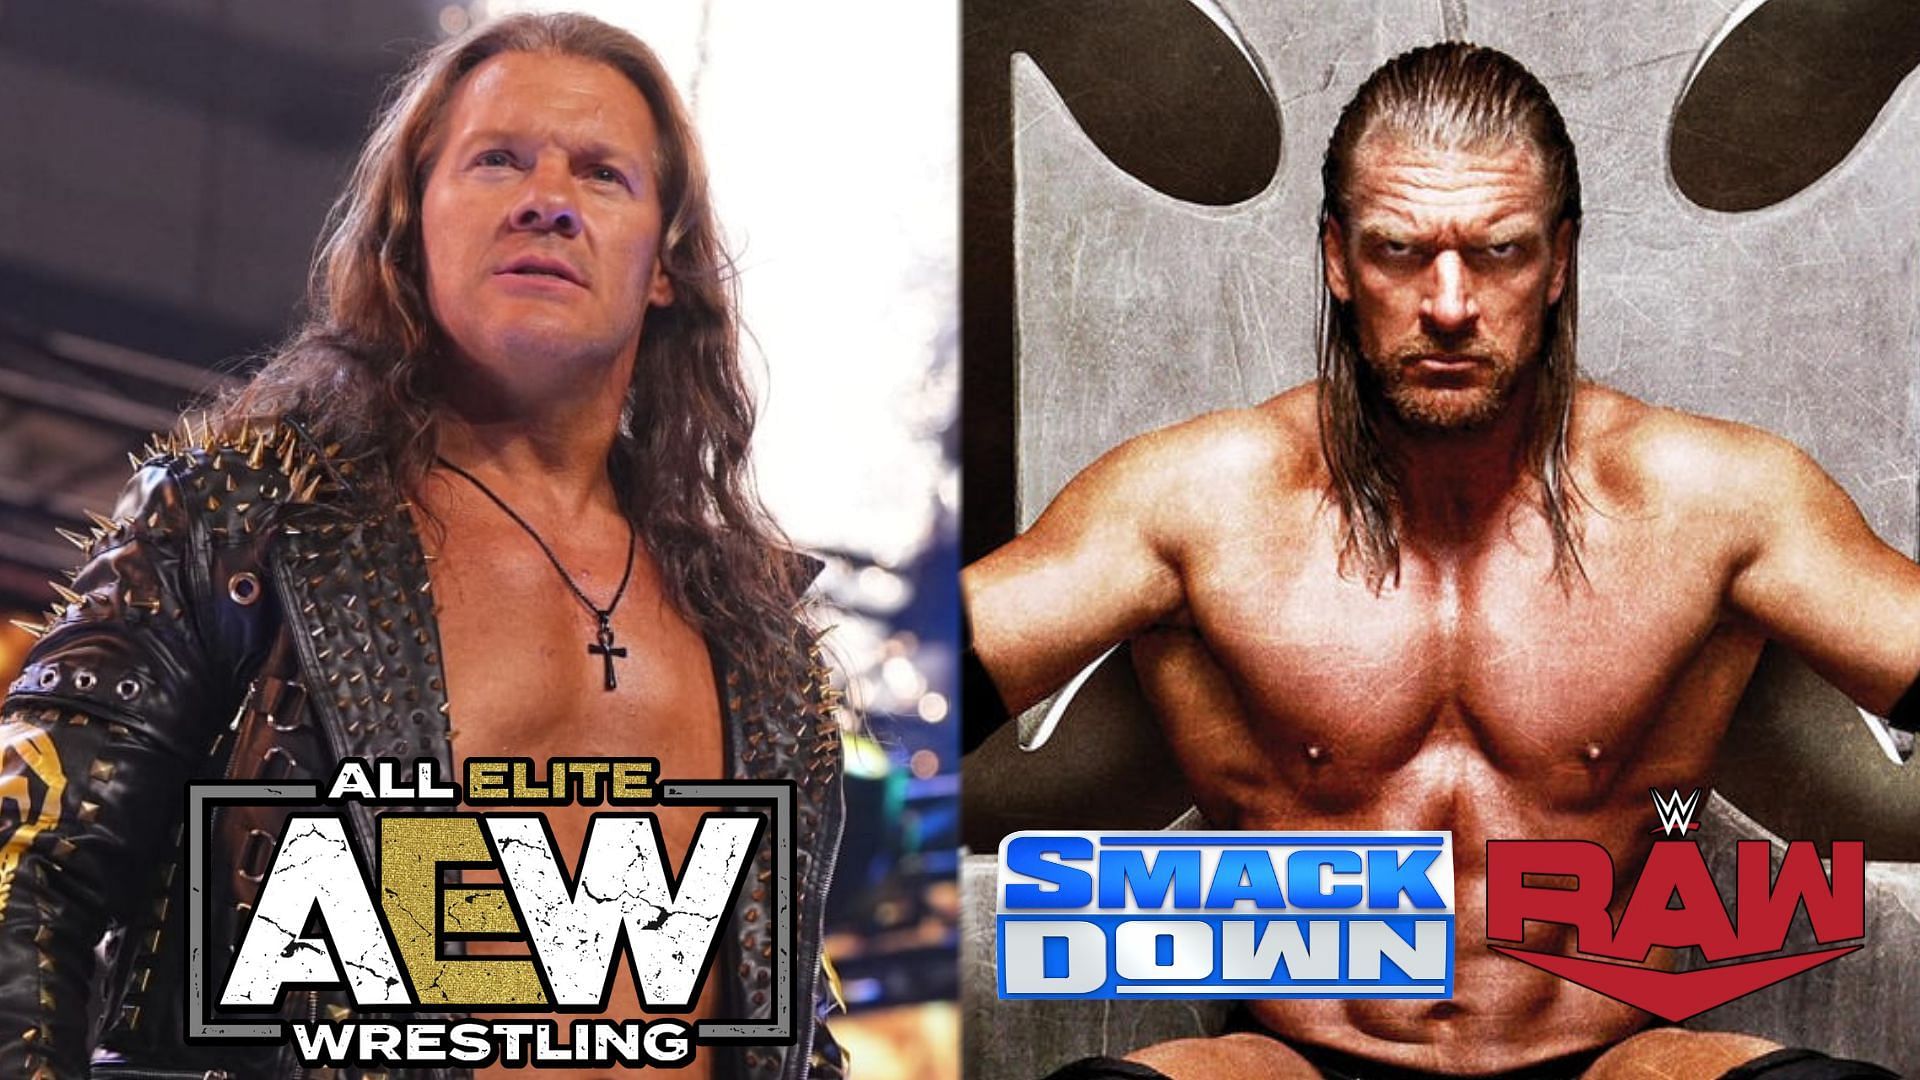 How have Chris Jericho and Triple H affected AEW over the past week?